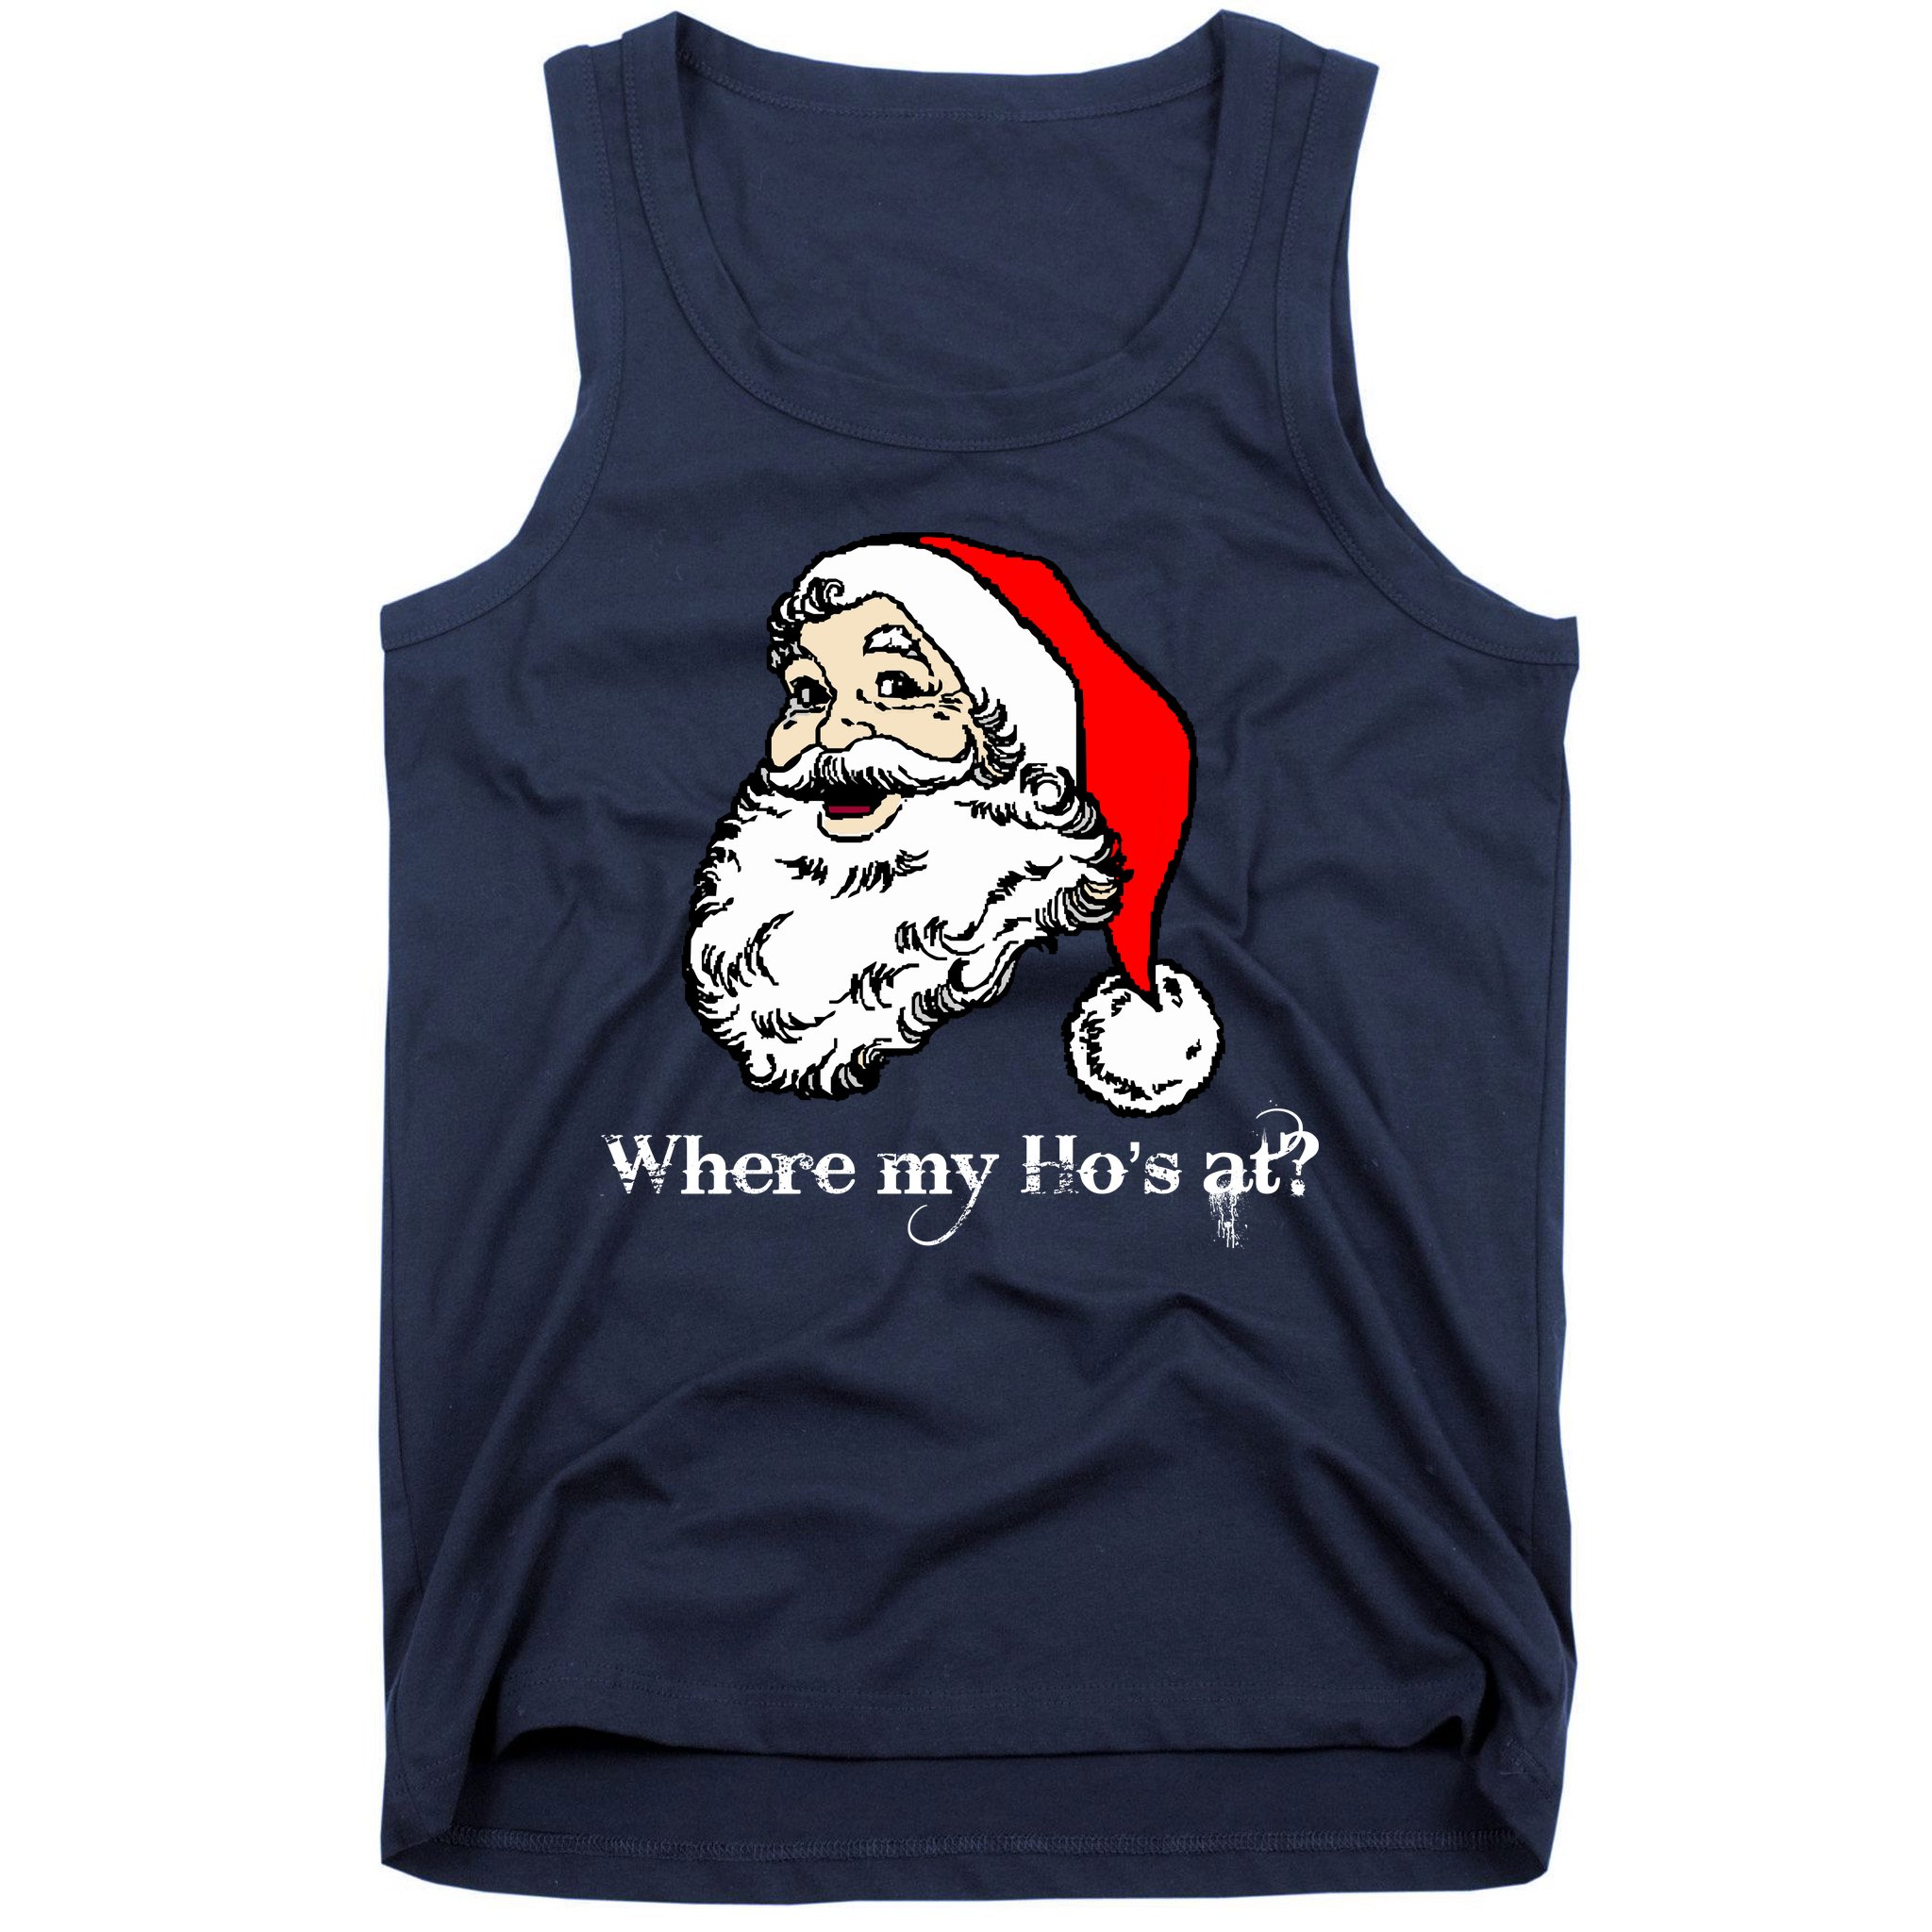 Santa Claus with Beer Tank Top Christmas in July Tank Top Funny Summer Xmas Tank Top Gift for Men Women